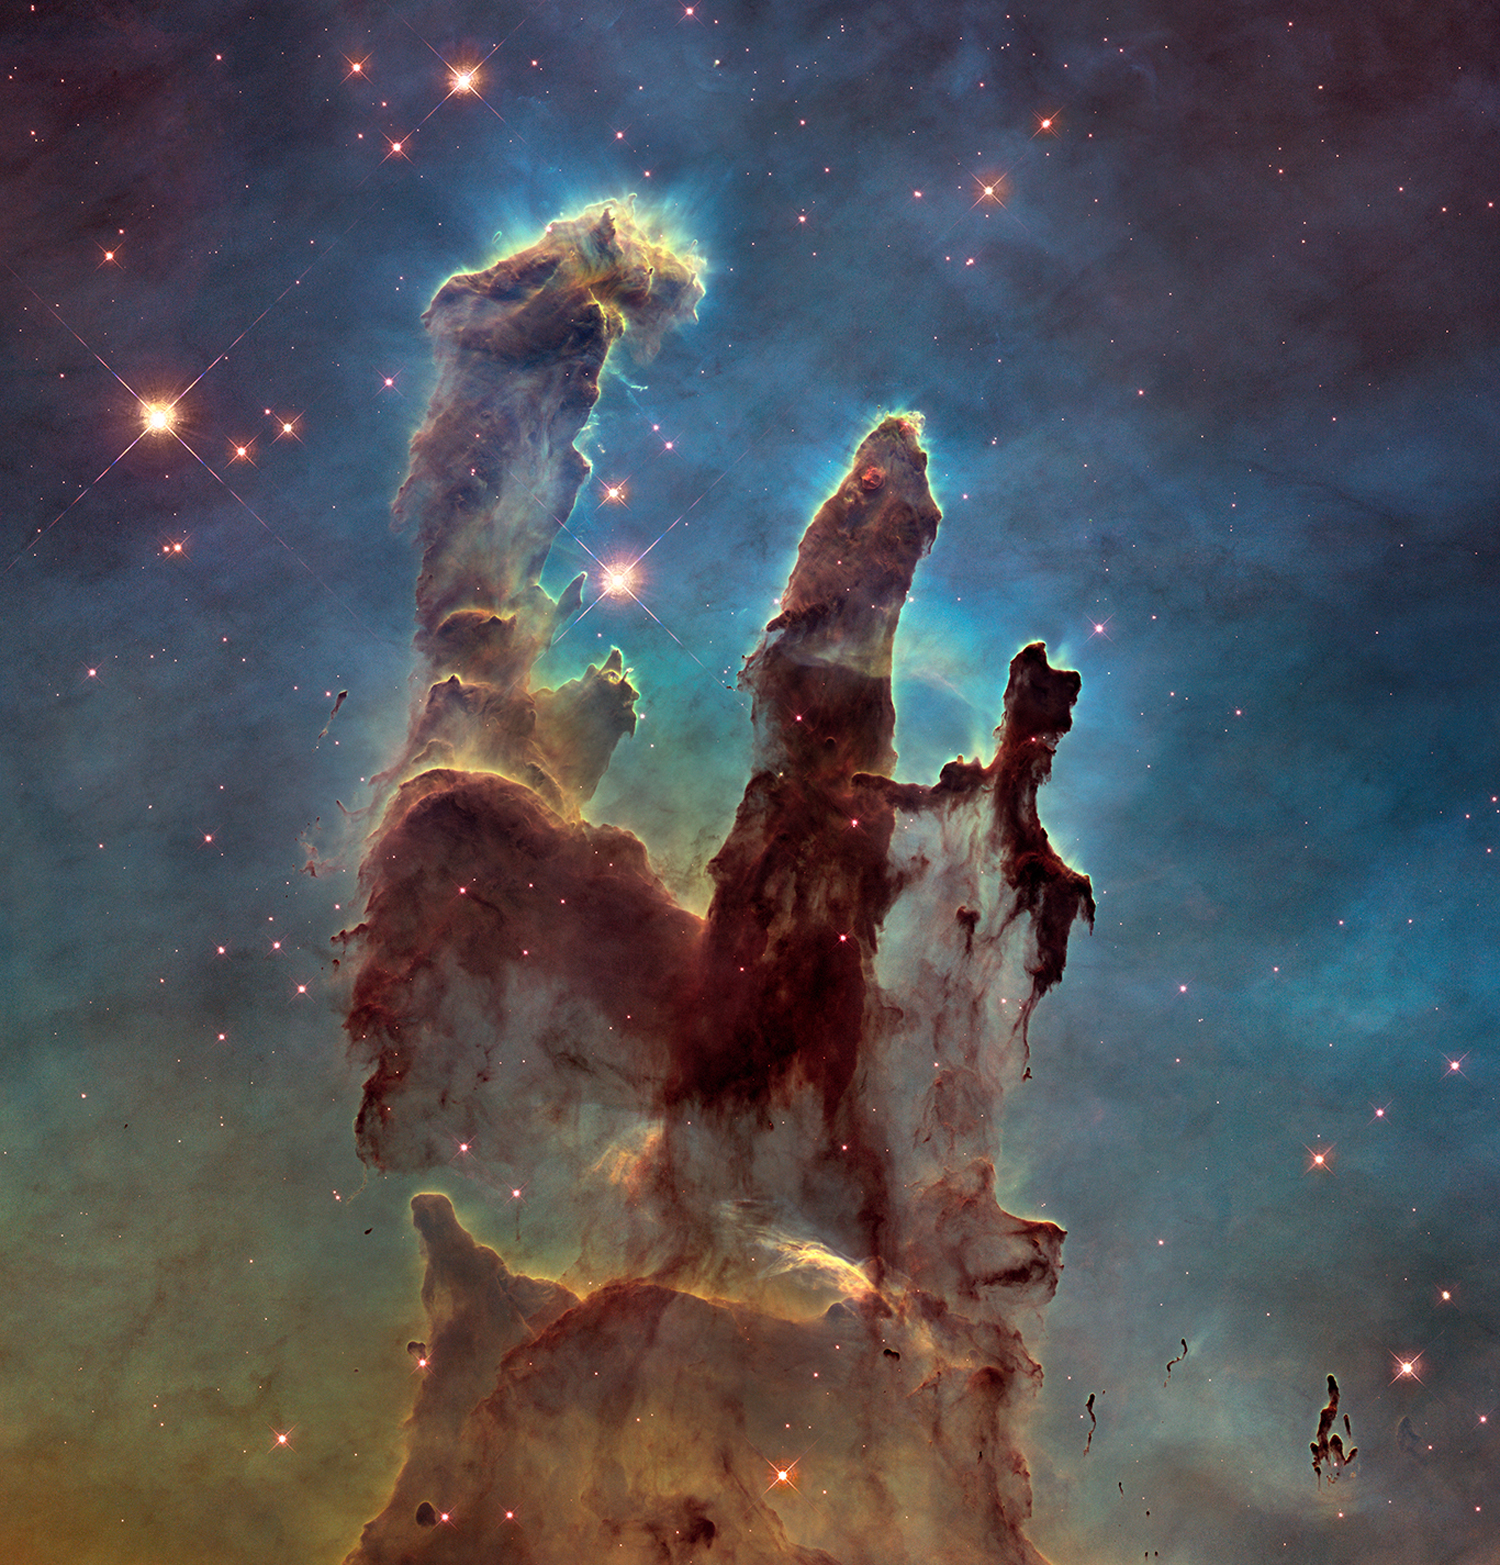 New stars are born in these towers of gas and dust, called the Pillars of Creation, in the Eagle Nebula.  It's an iconic image and one of our best space images of all time.